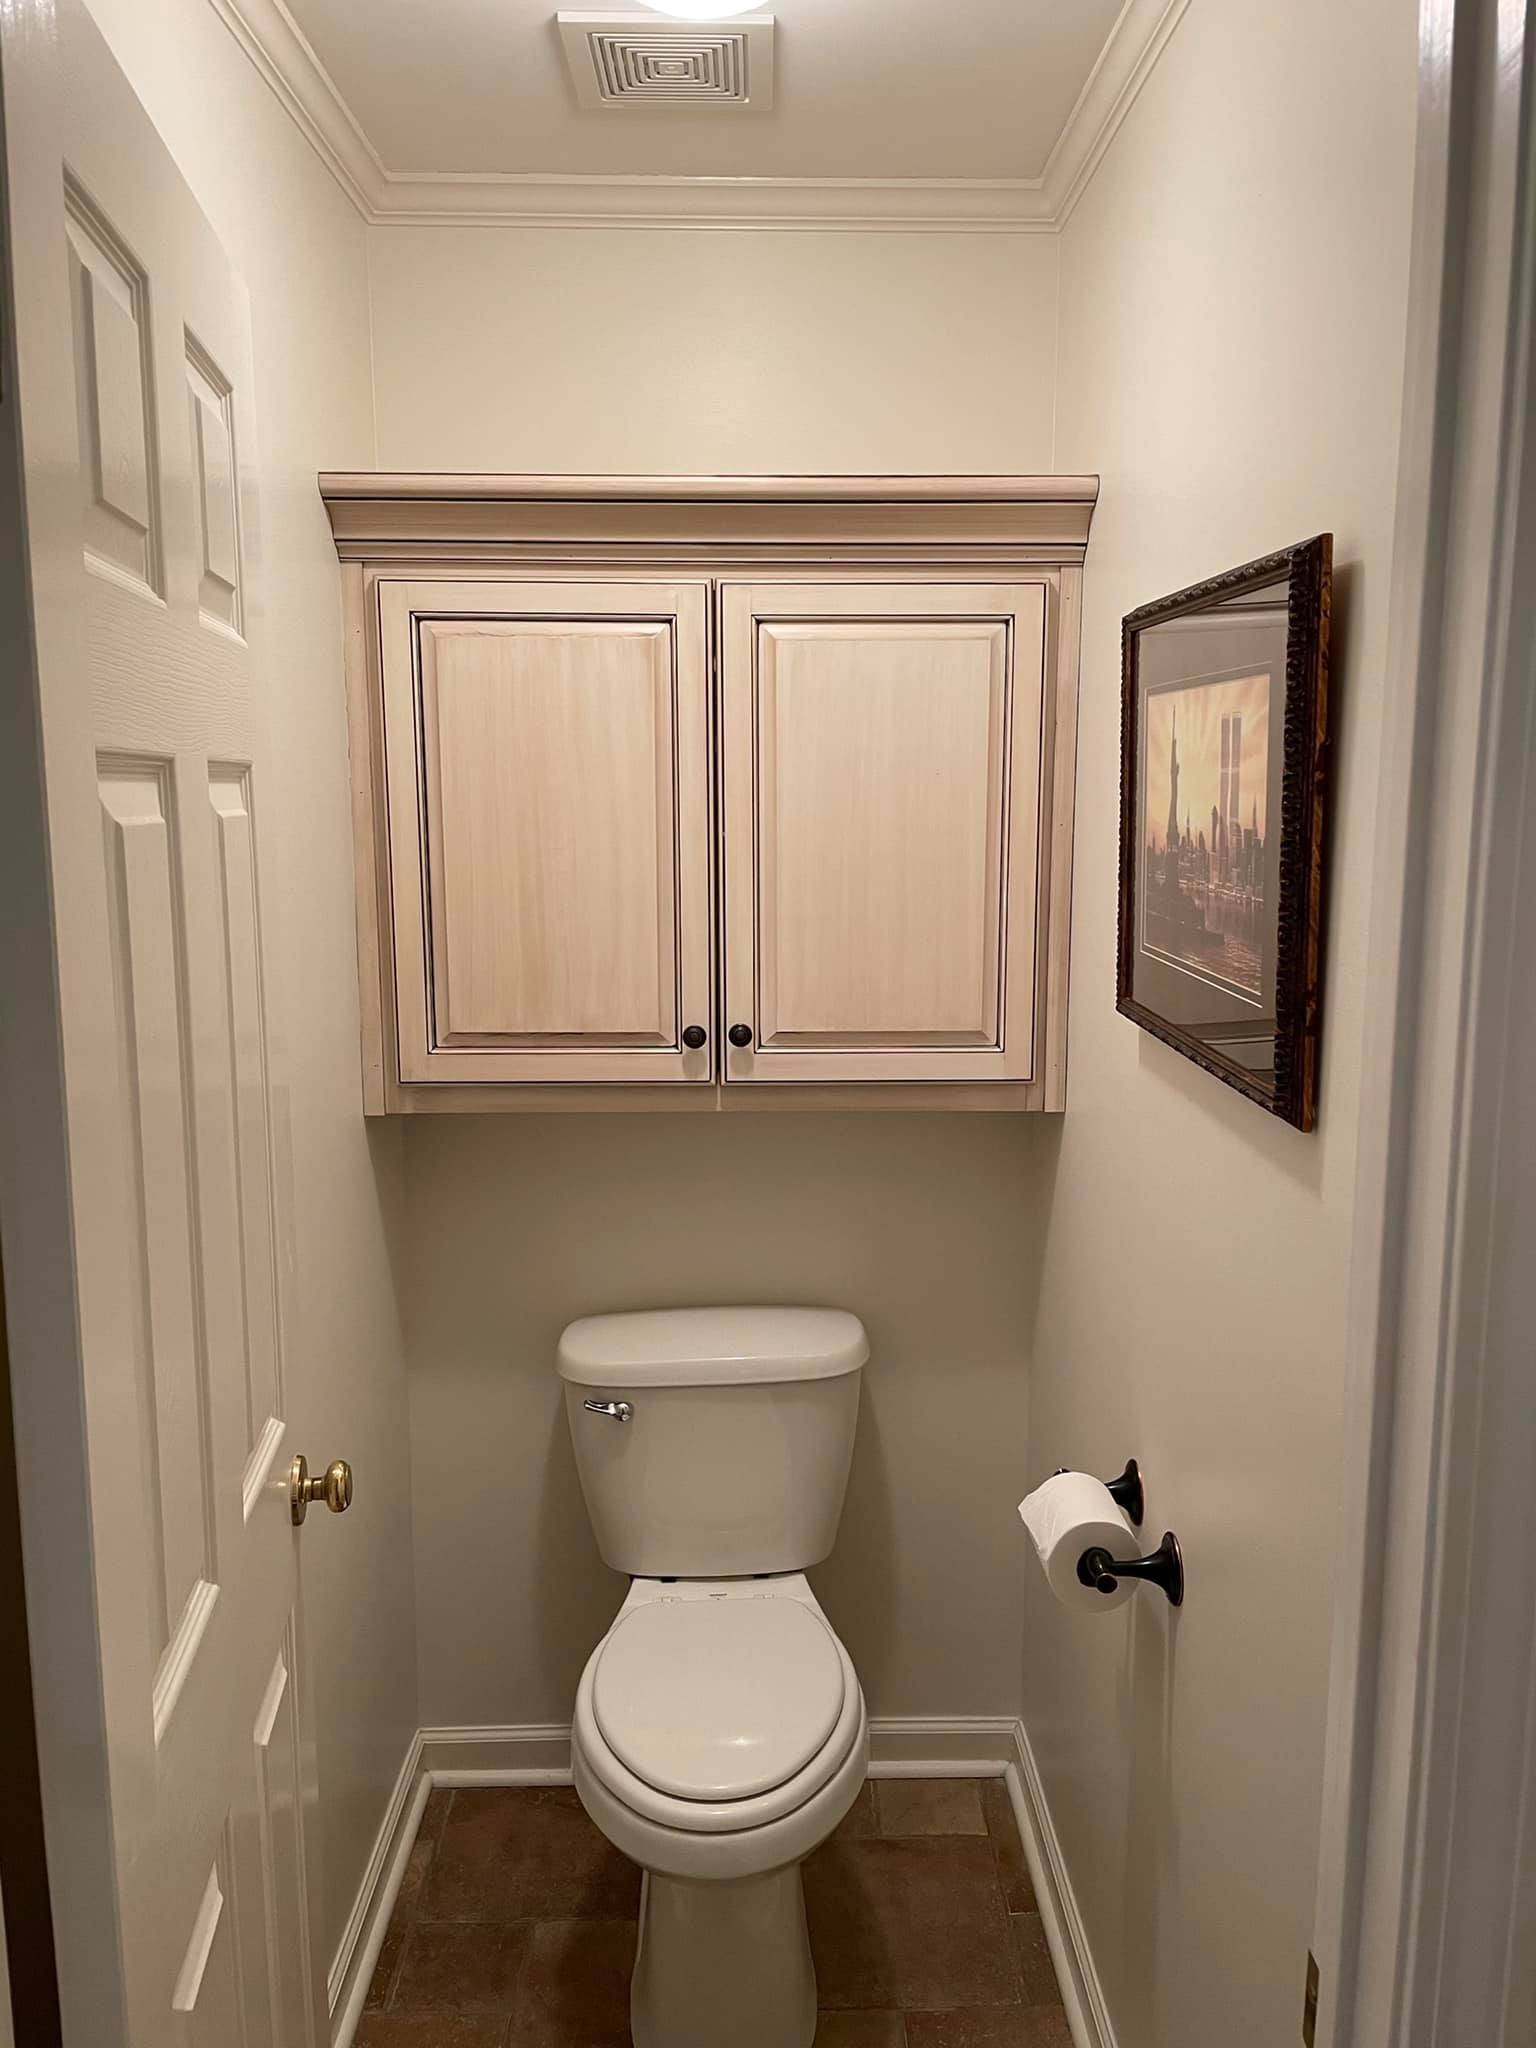 Bathroom Painting and Fixing for Mae Painting in Memphis, Tennessee